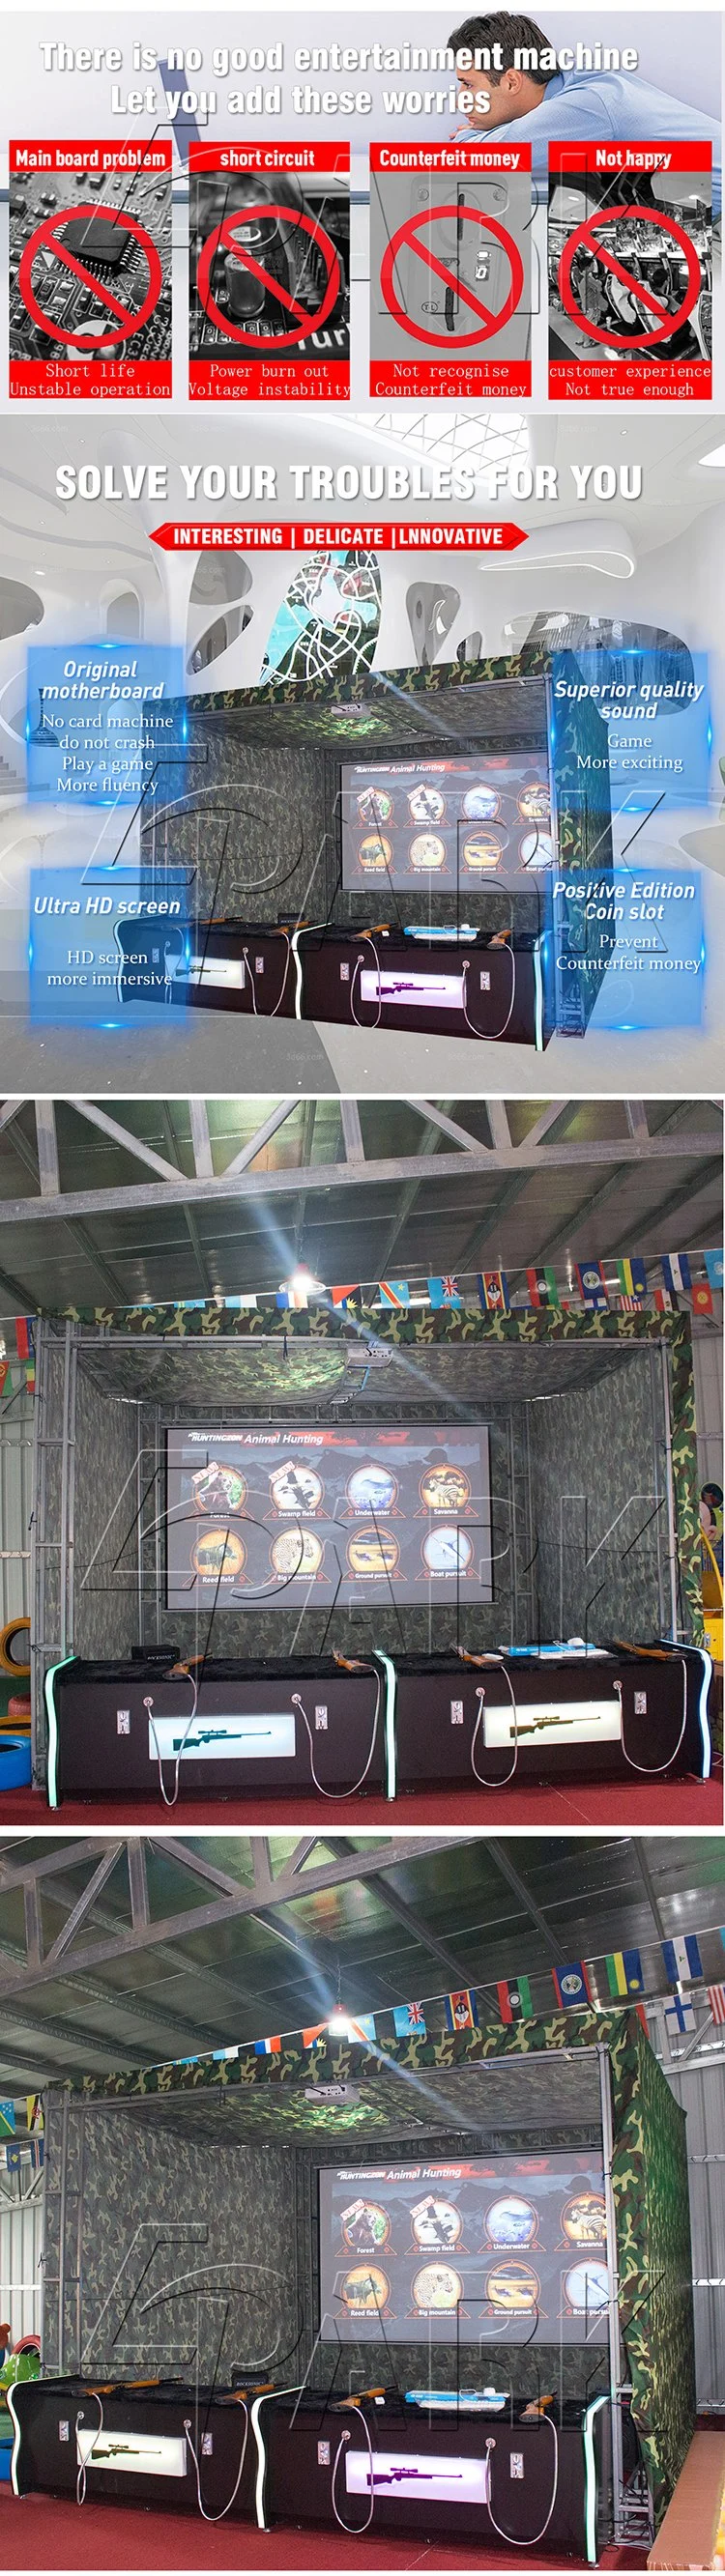 Commercial Games Adult Shooting Arcade Game Machine with Stand Platform Coin Operated Equipment